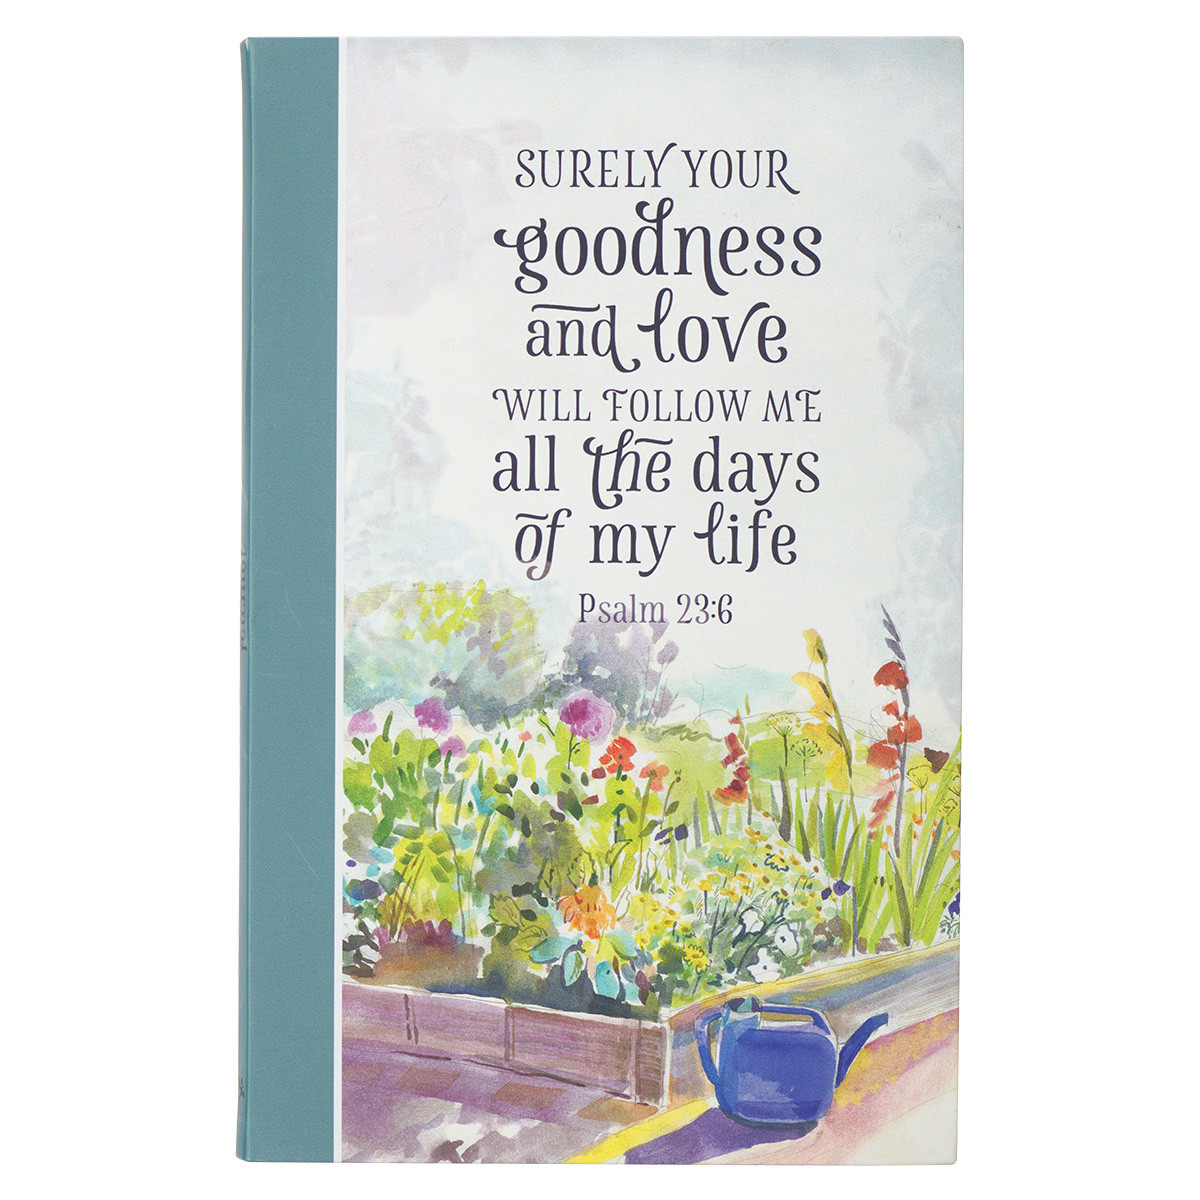 Goodness and Love Flexcover Journal - Psalm 23:6